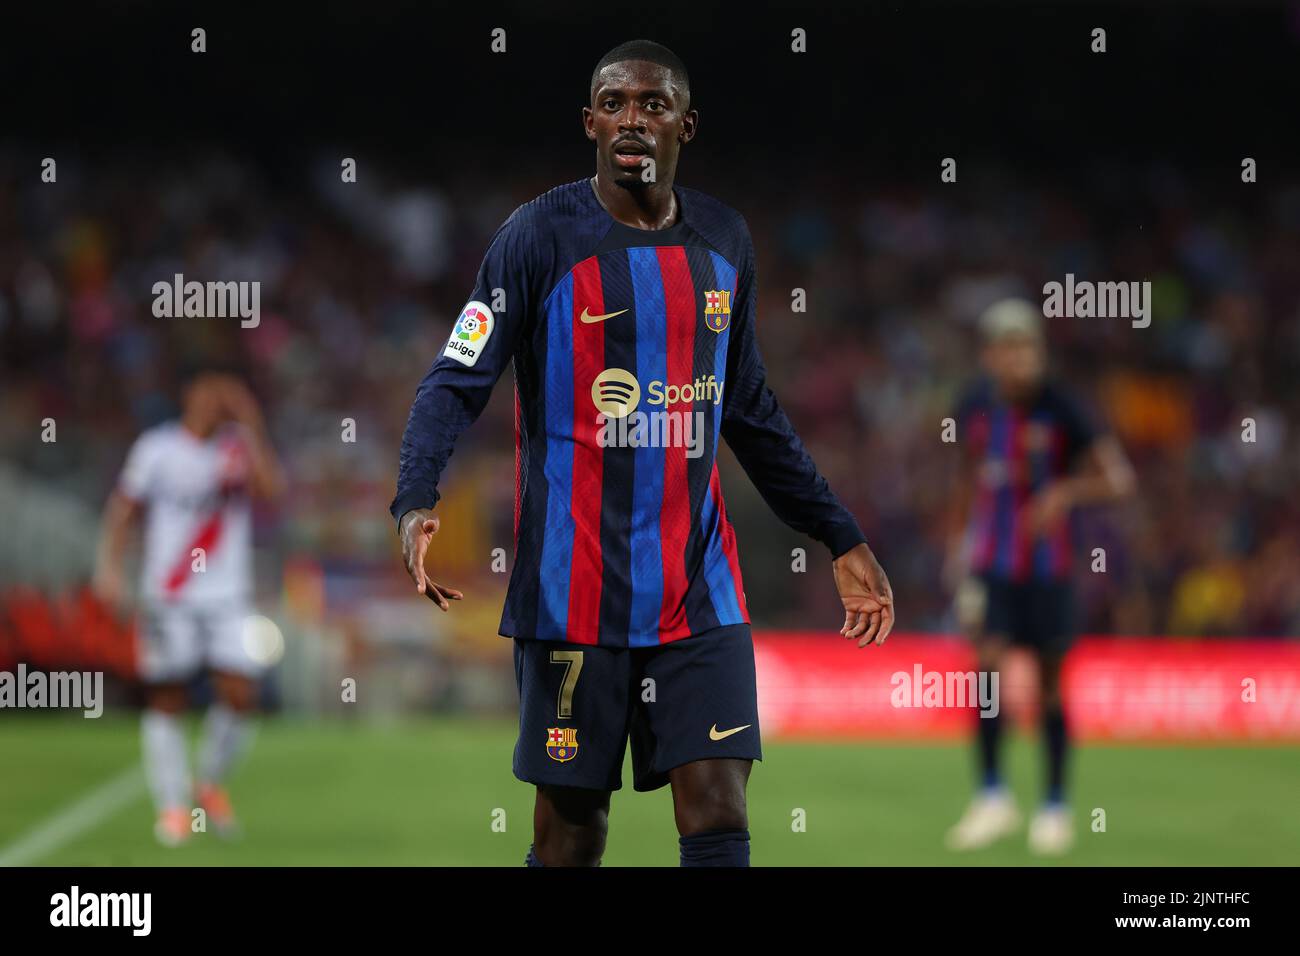 Ousmane Dembele of FC Barcelona during the Liga match between FC Barcelona and Rayo Vallecano at Spotify Camp Nou in Barcelona, Spain. Stock Photo